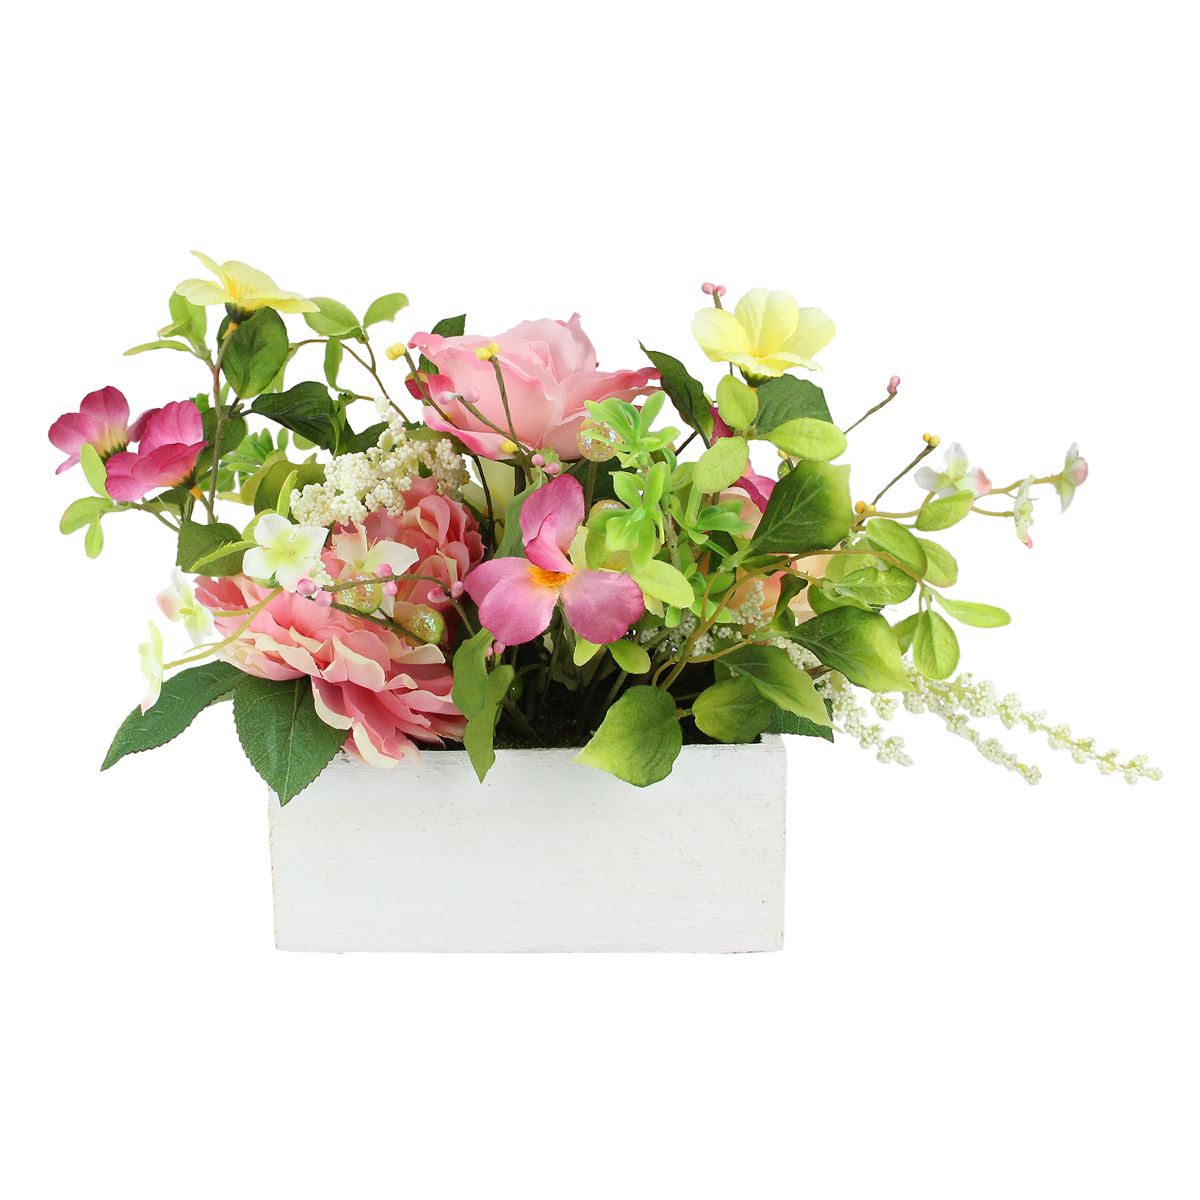 Northlight Seasonal Artificial Flowers And Greenery In A Planter